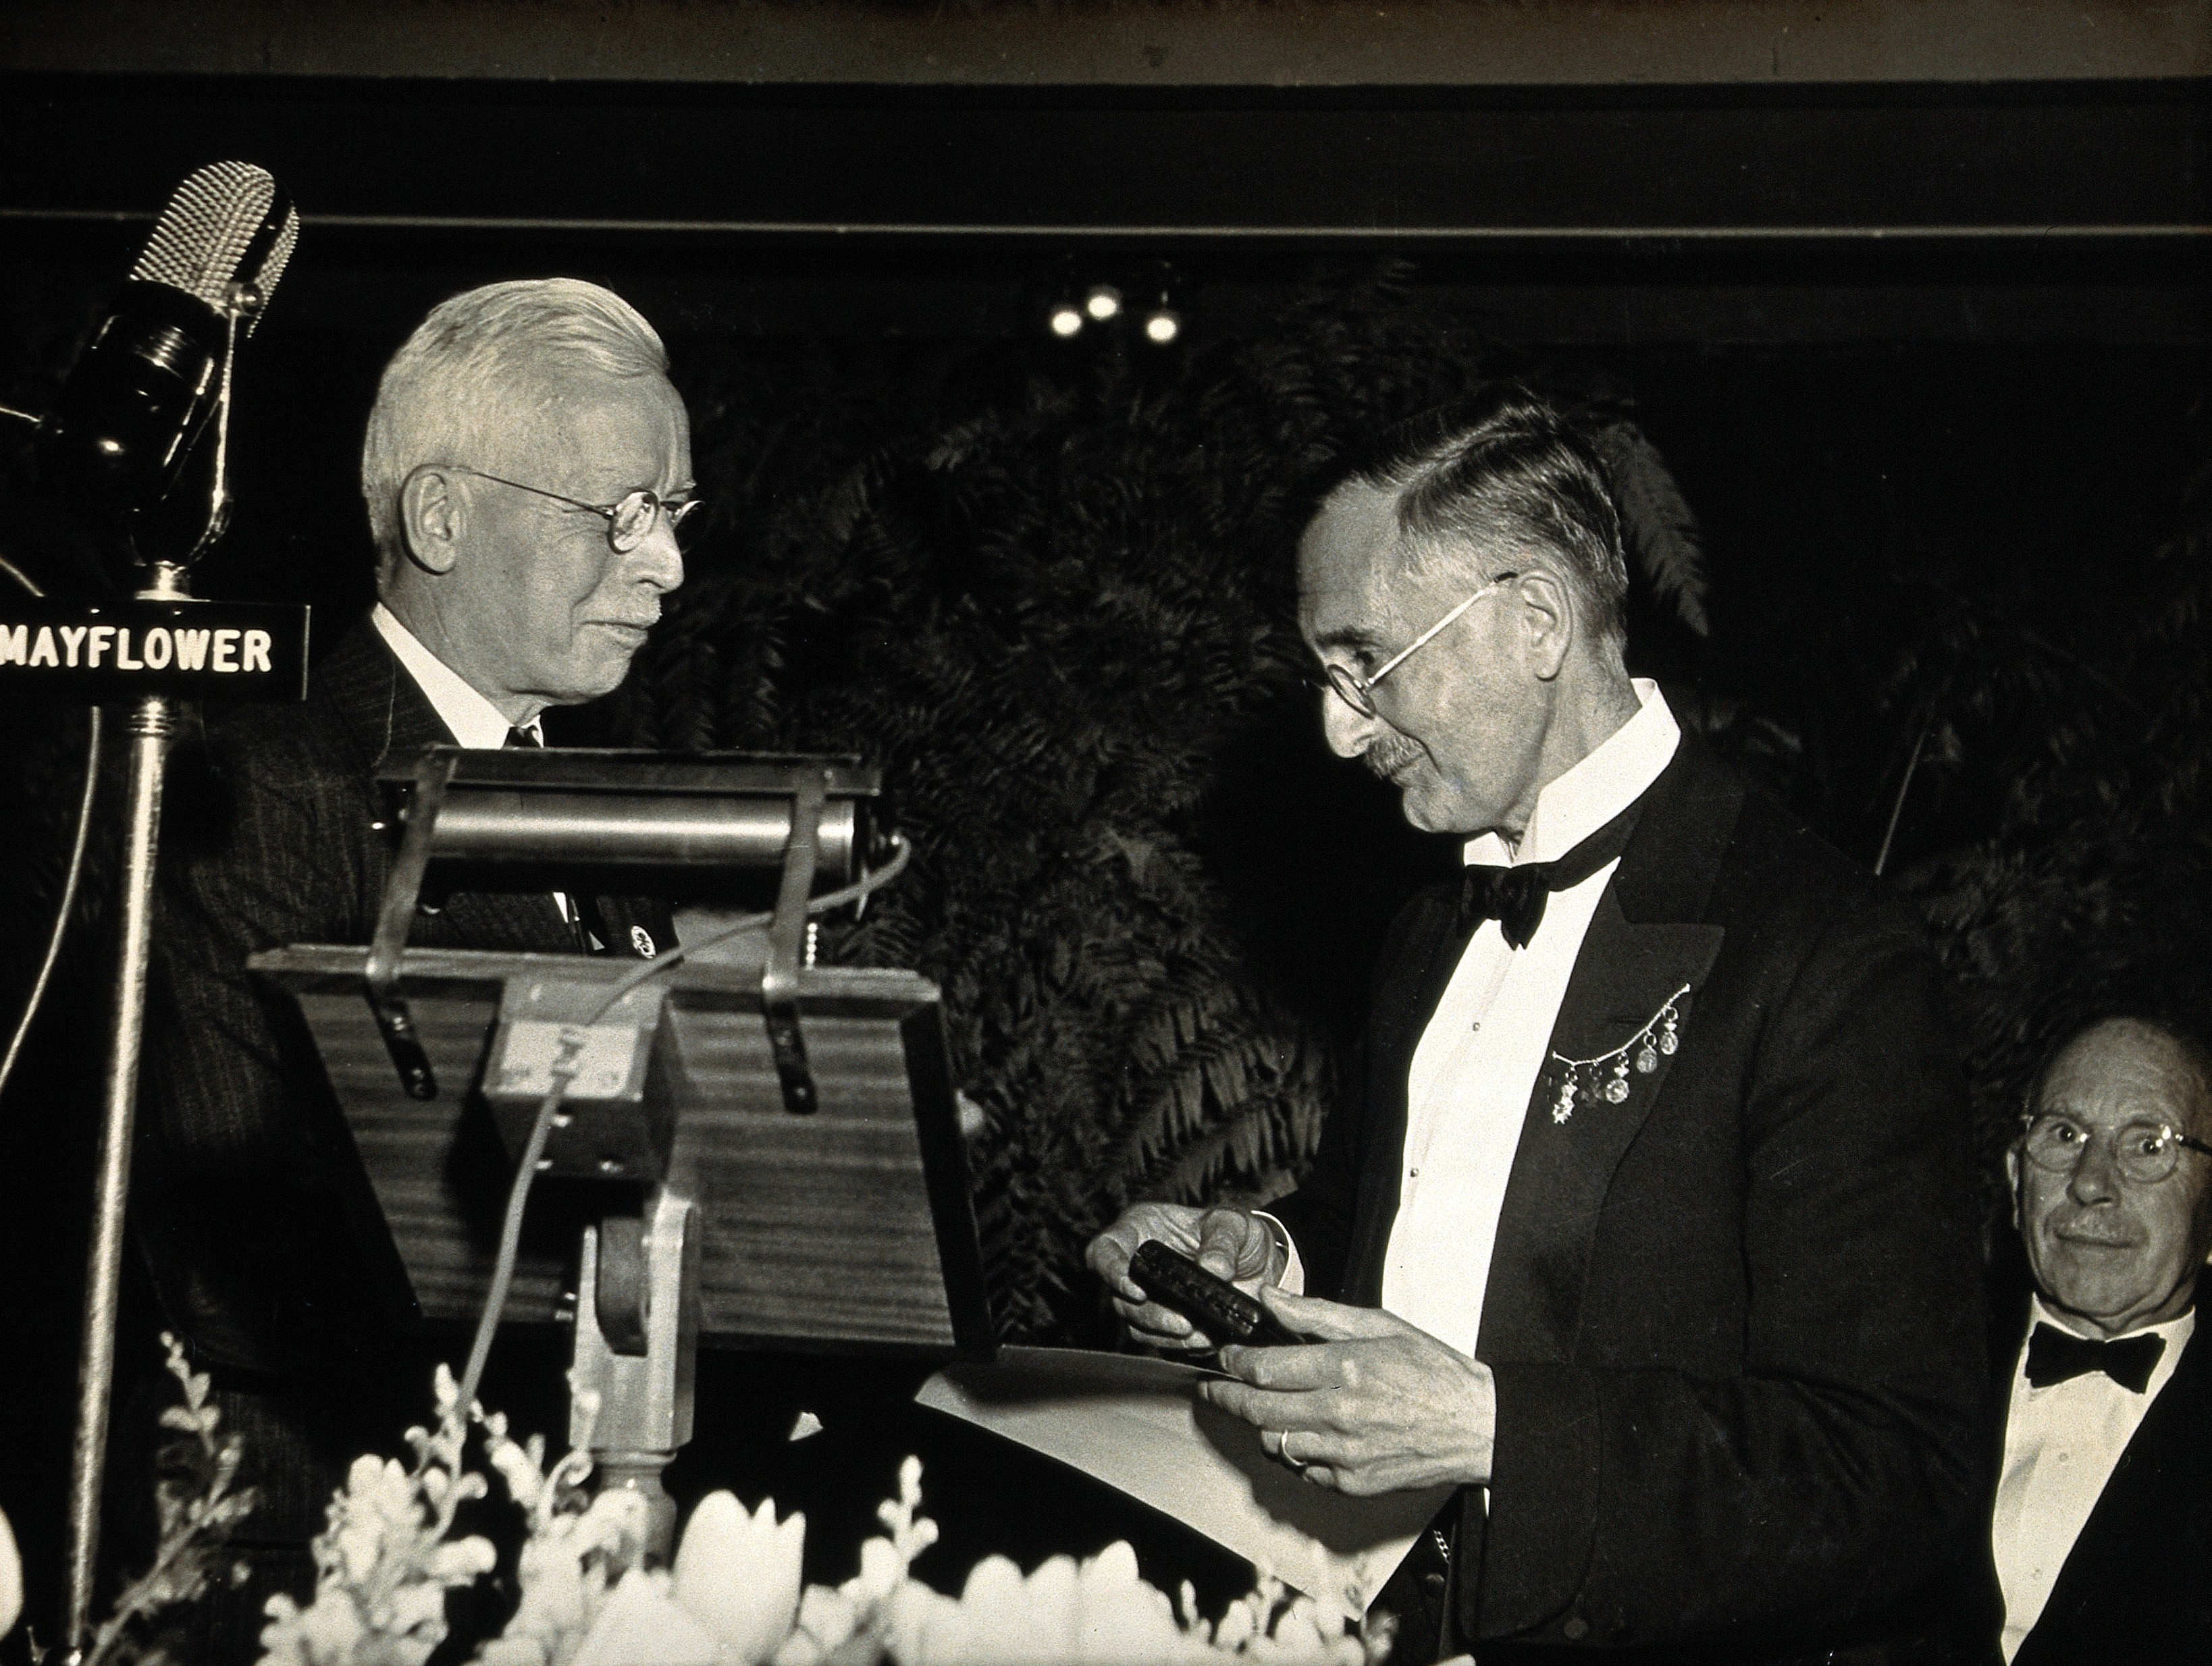 N.H. Swellengrebel receiving the Laveran Prize from Rolla Dy Wellcome V0028083